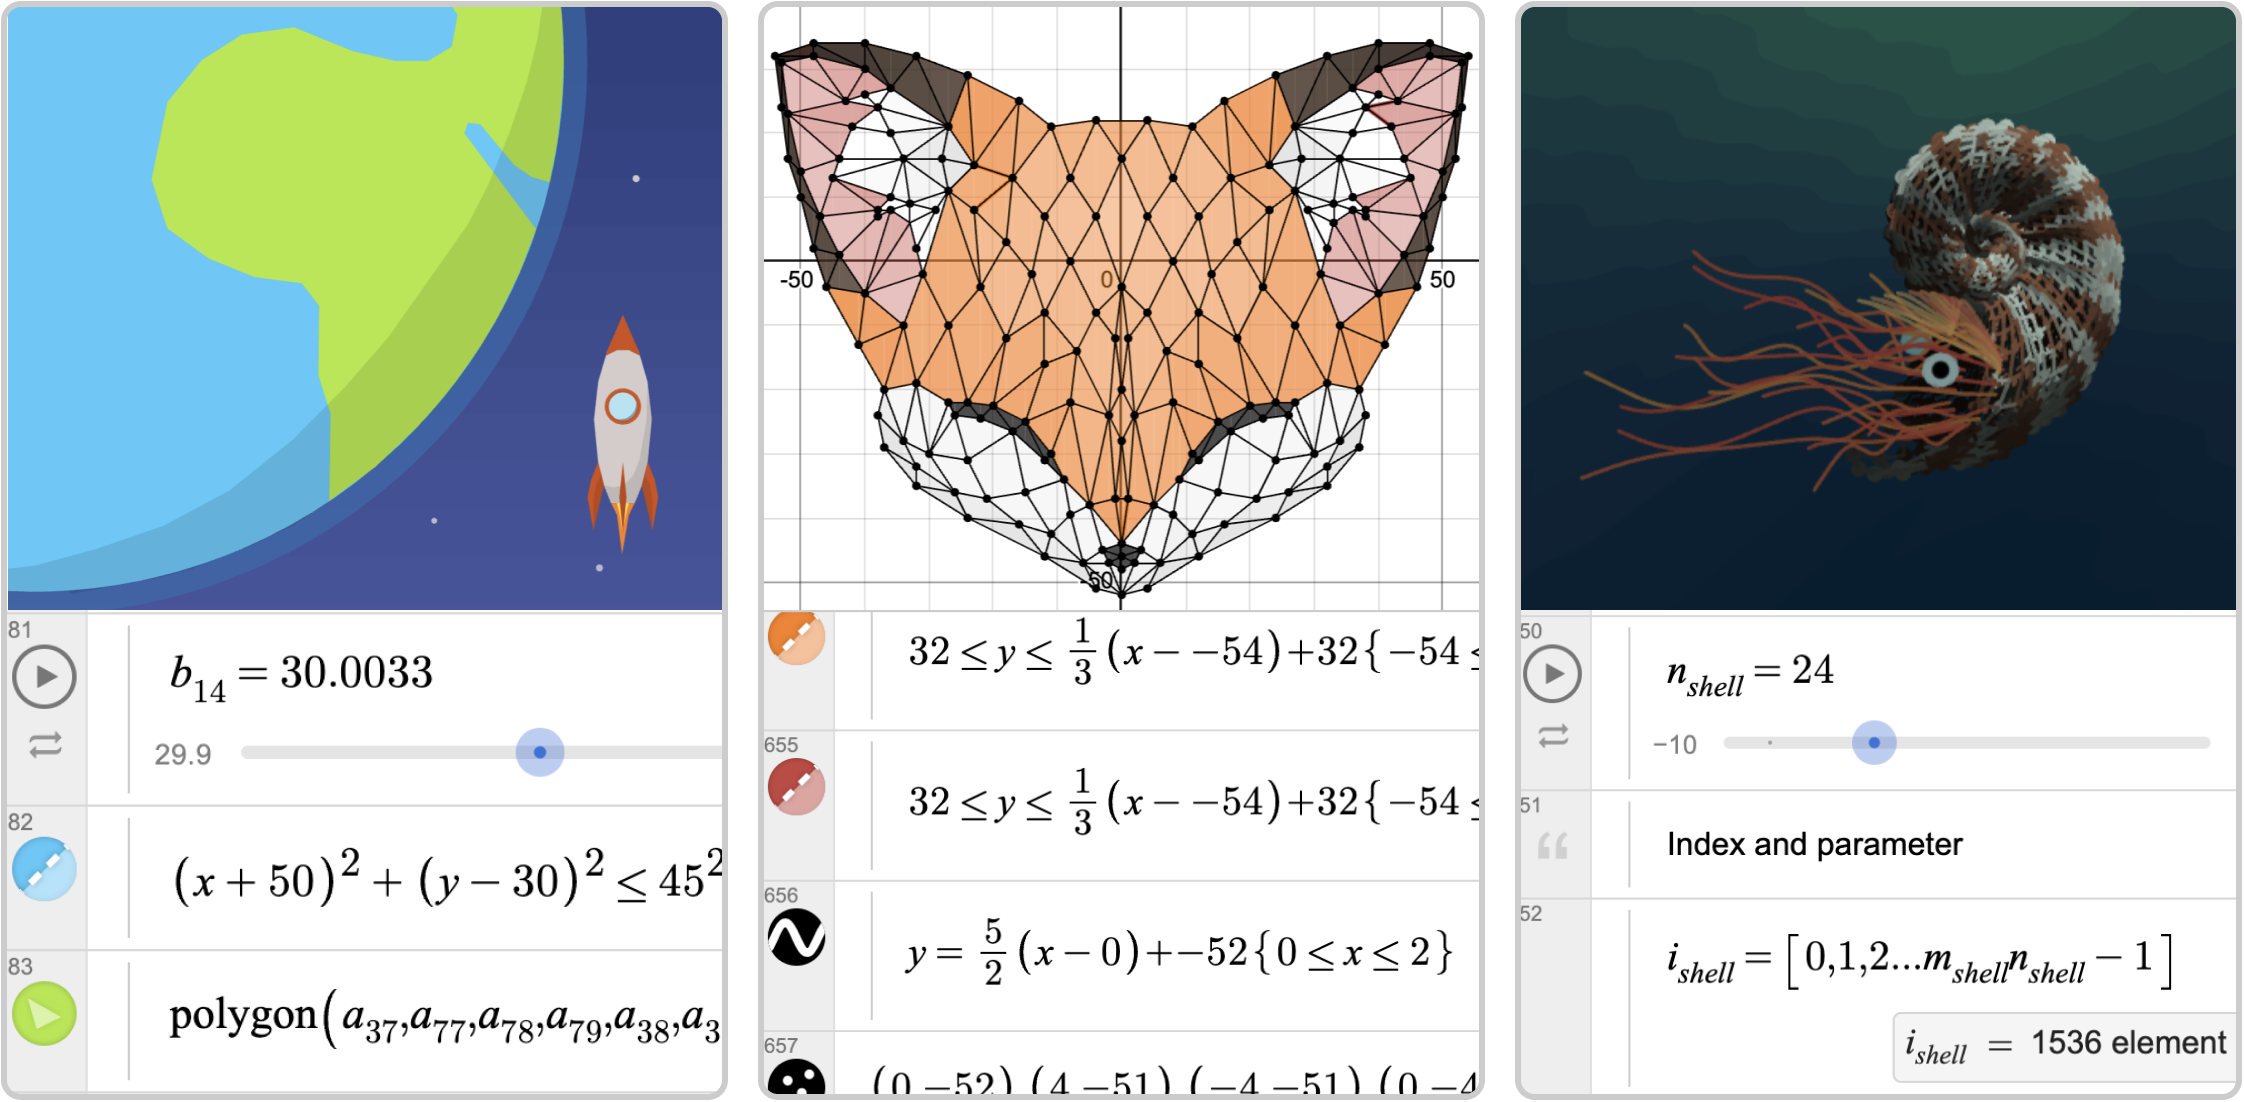 a rocket ship orbiting the earth, the head of a fox made up of line segments, and a nautilus using lists.